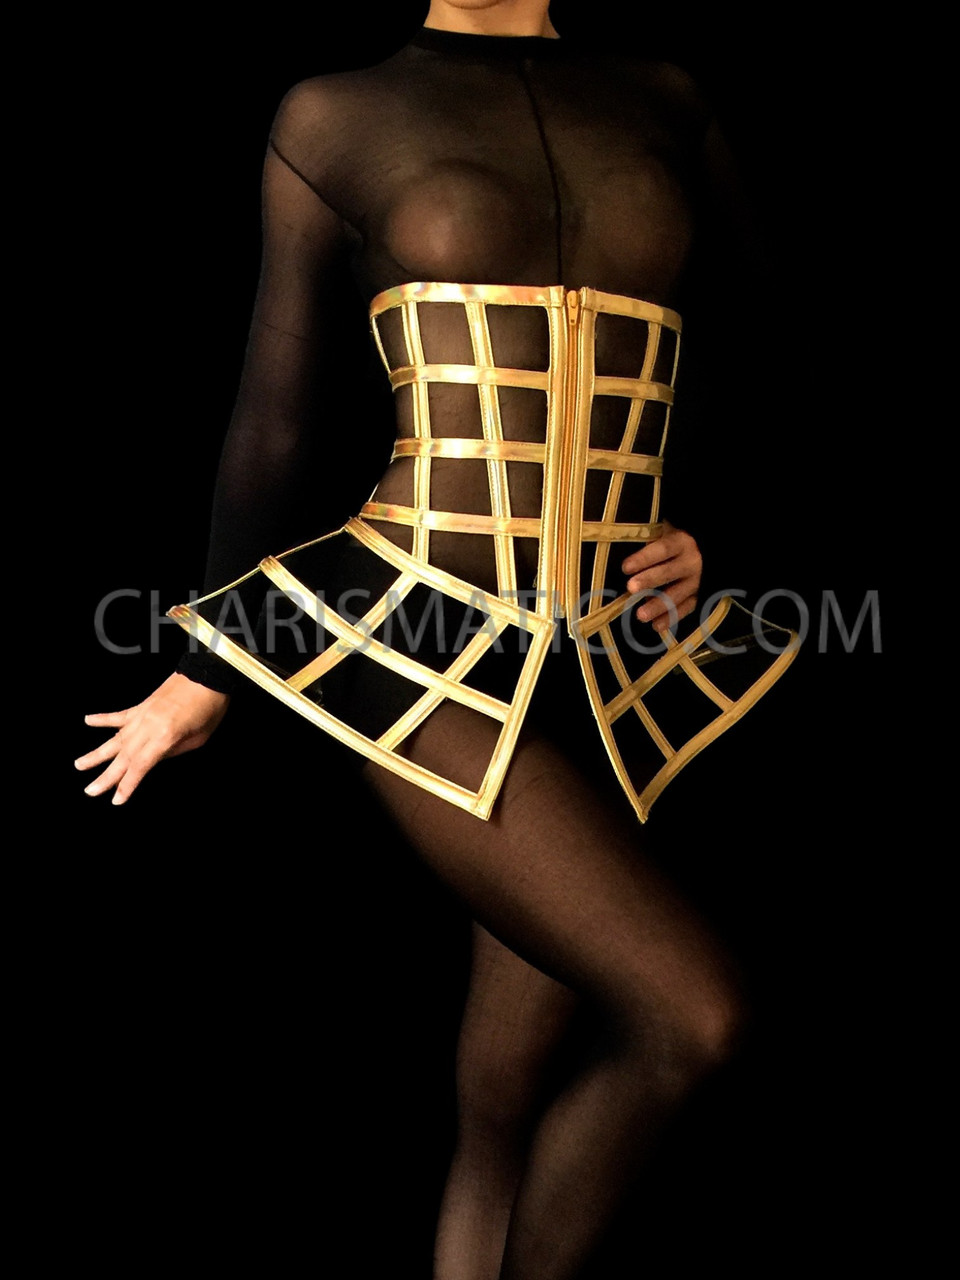 Showgirl's Sexy Iridescent Metallic Gold Underbust Corset Styled Cage Skirt